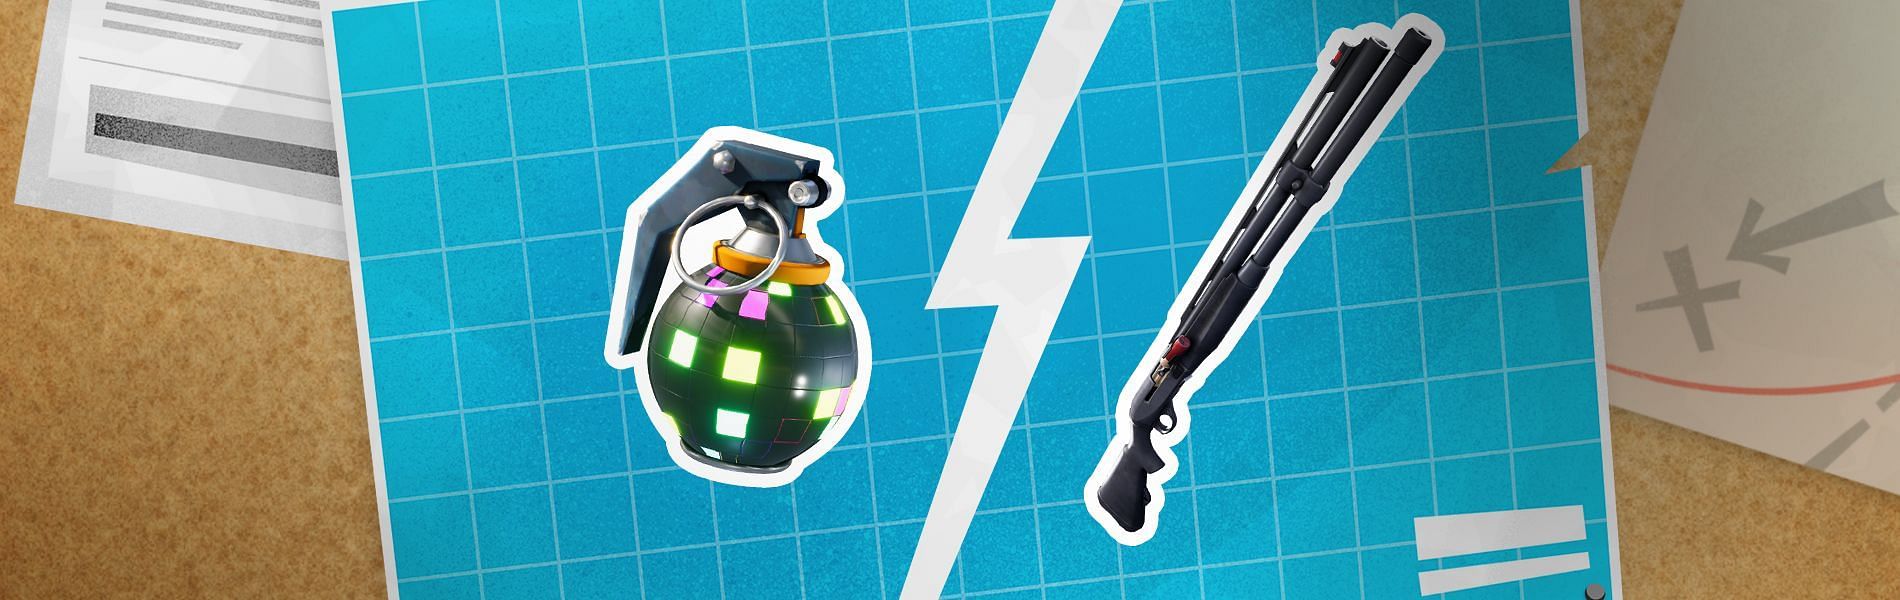 The latest War Effort pits the Boogie Bomb against the Combat Shotgun (Image via Epic Games)